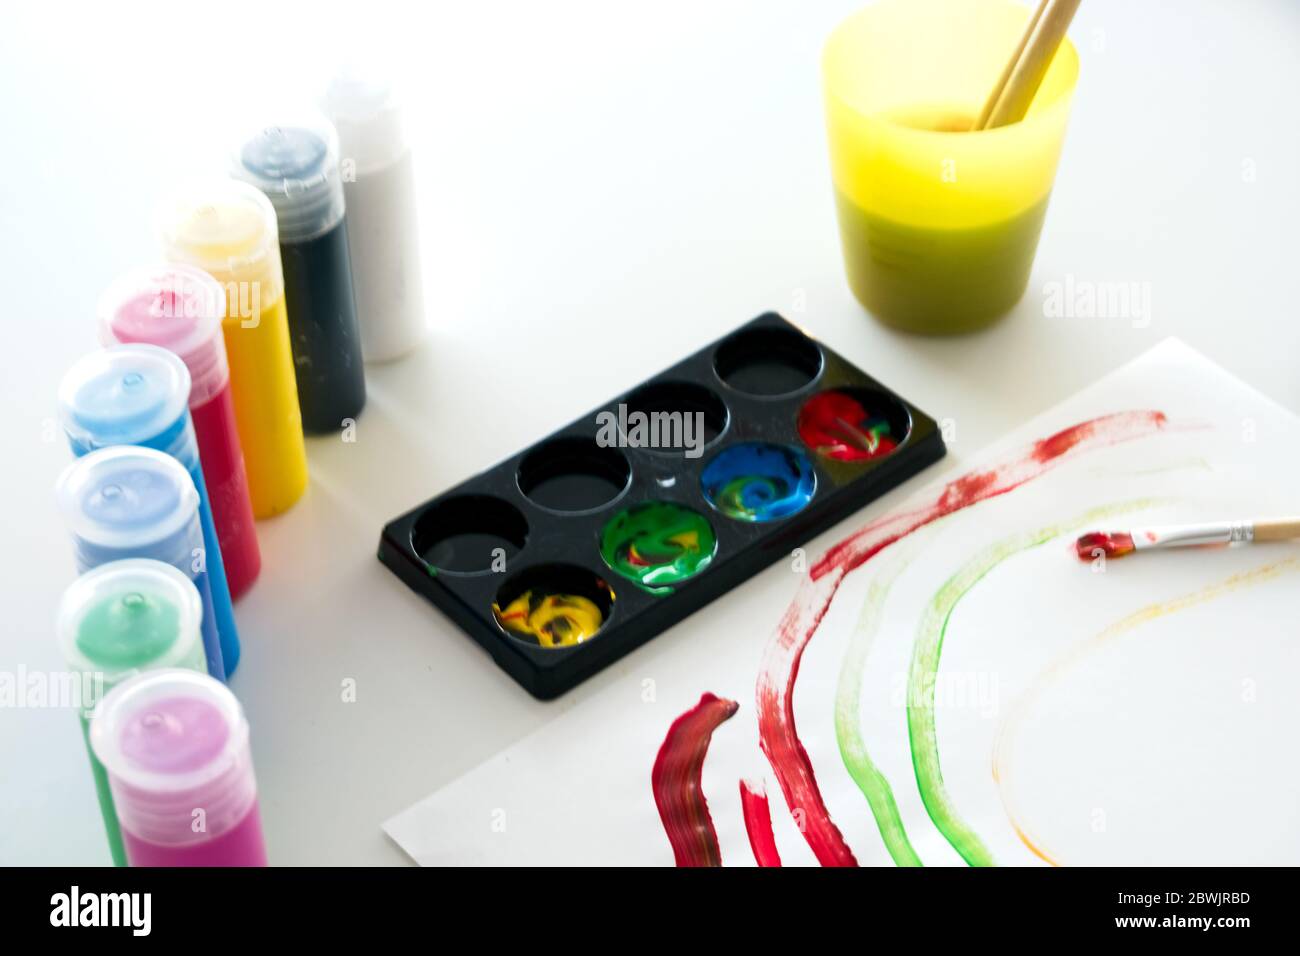 White paper with a child's drawing made of colored paint with several containers of vegetable paint and a plastic cup with water and brushes inside Stock Photo